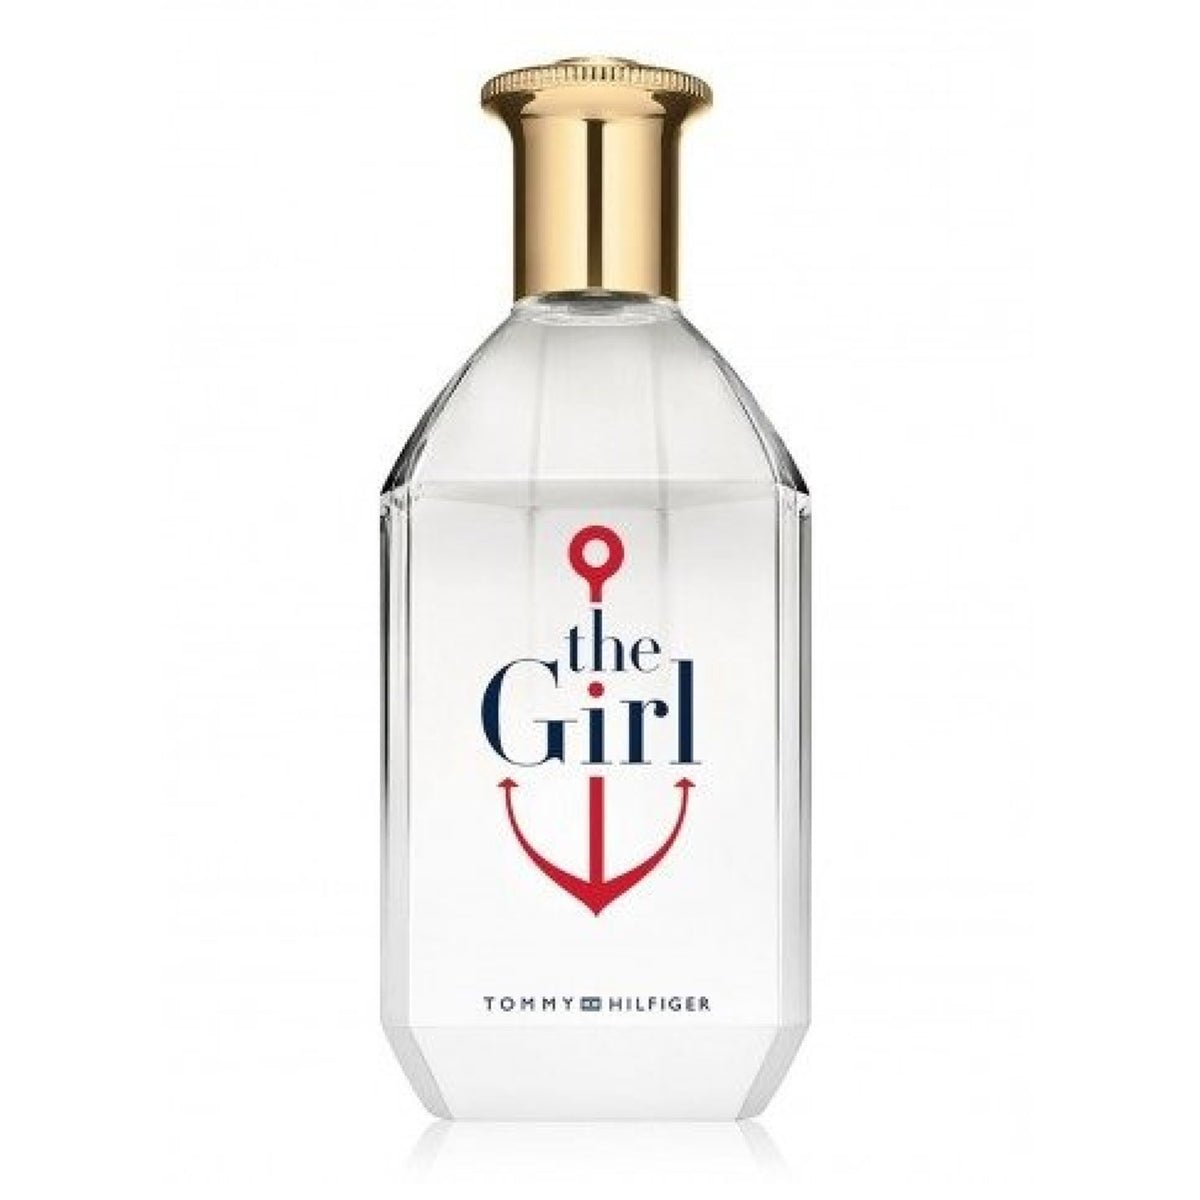 Tommy Hilfiger The Girl Edt For Women 100ml - AllurebeautypkTommy Hilfiger The Girl Edt For Women 100ml